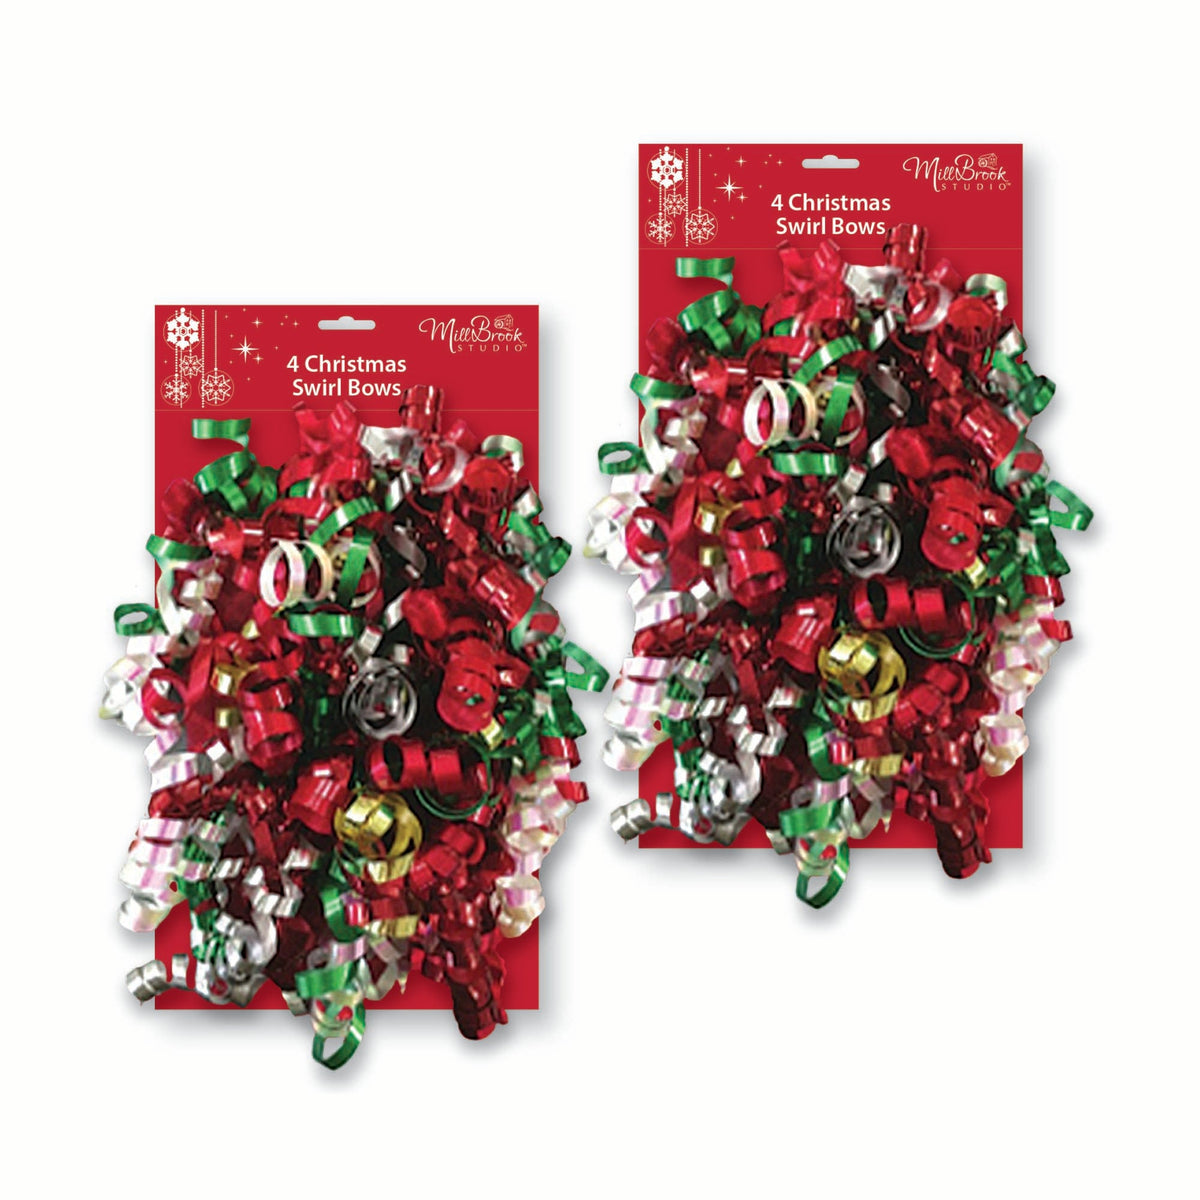 A-LINE Christmas Christmas Swirl Bows, Red, Green, White, Gold and Silver, 4 Count